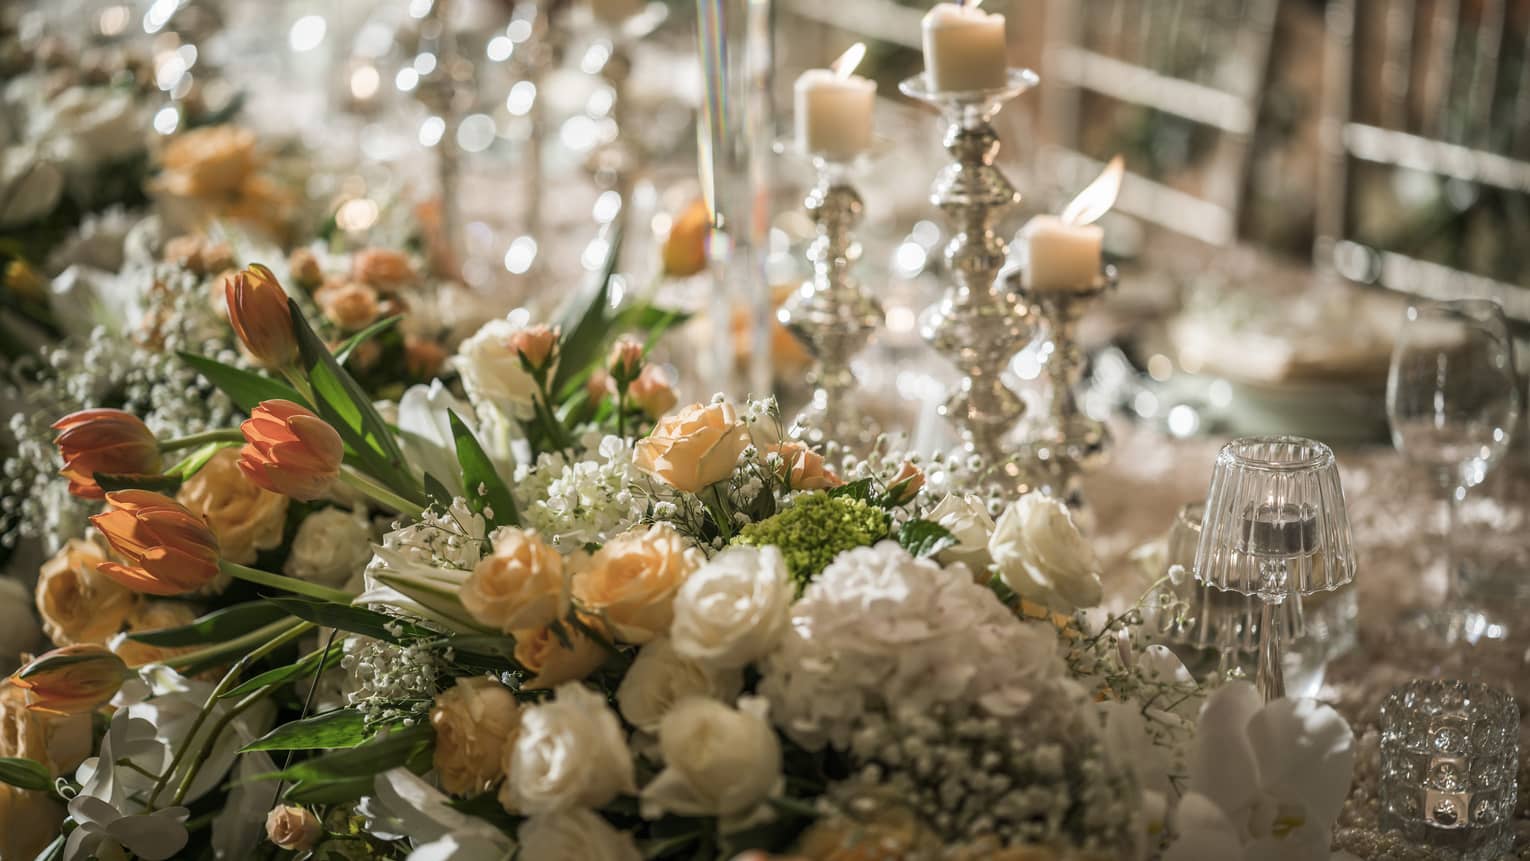 Close-up of flower arrangement with small white and peach roses, candles